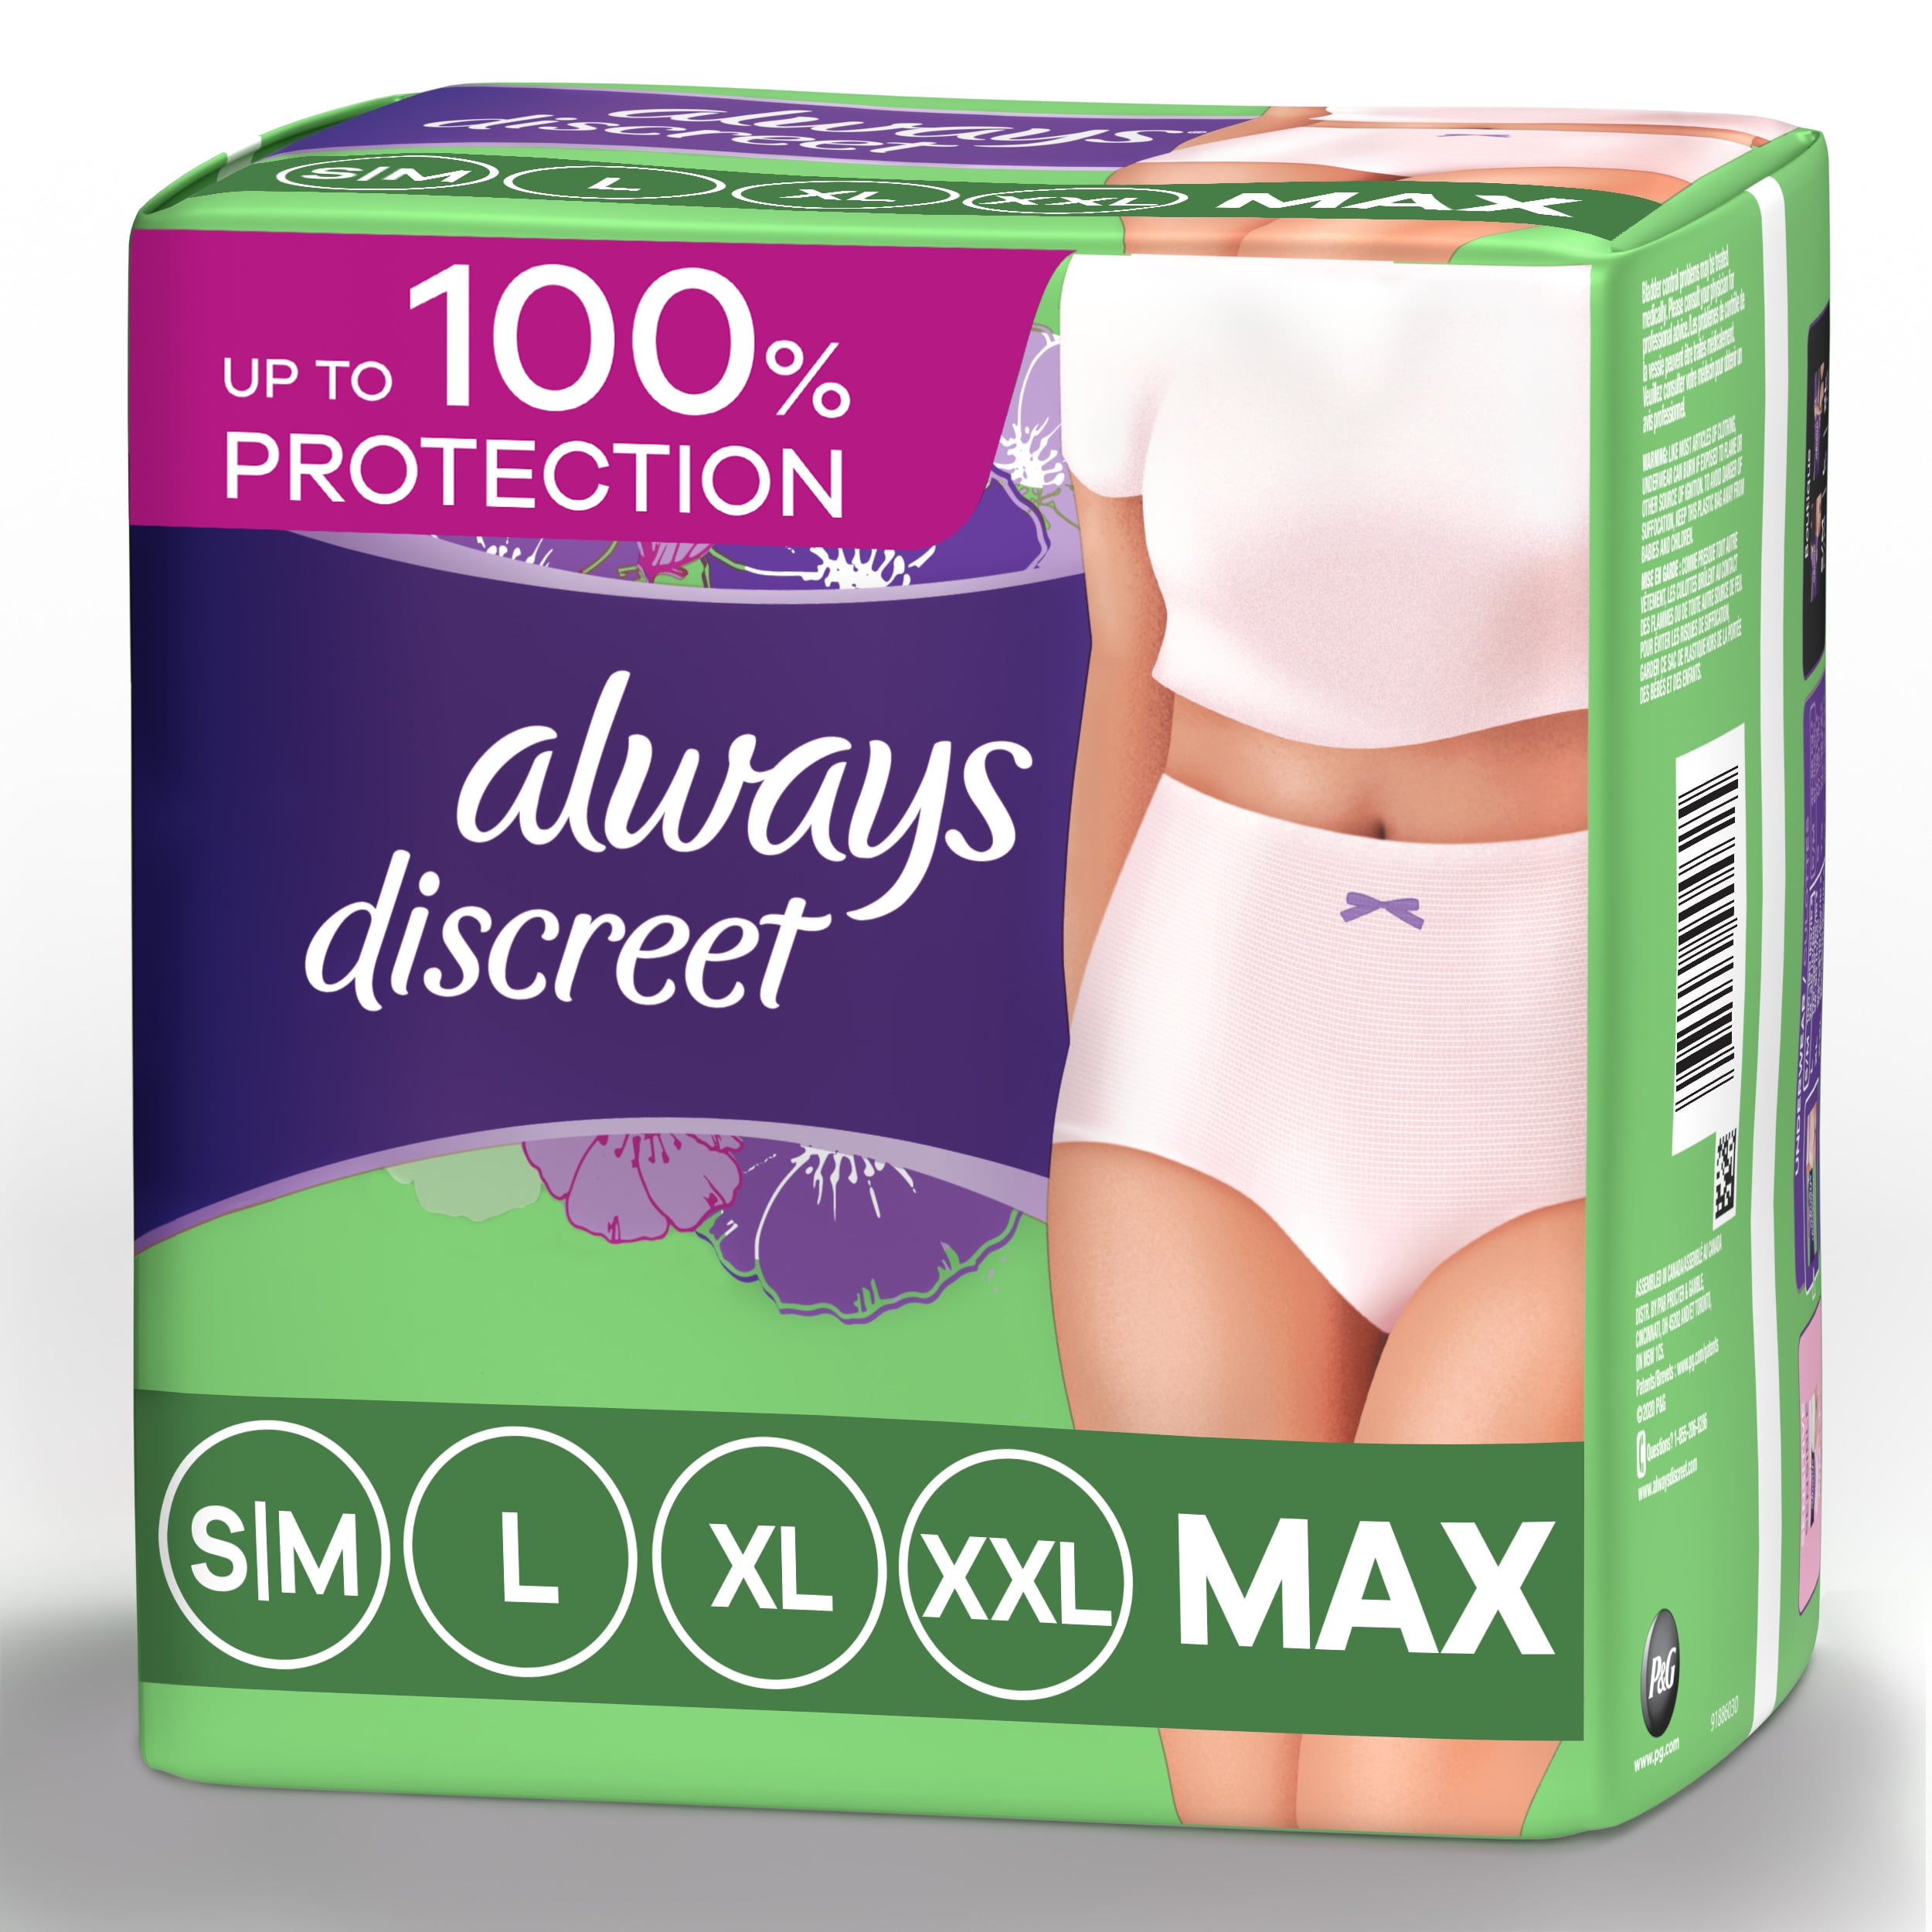 Tena lady pants diapers Discreet Size M 6 pieces 